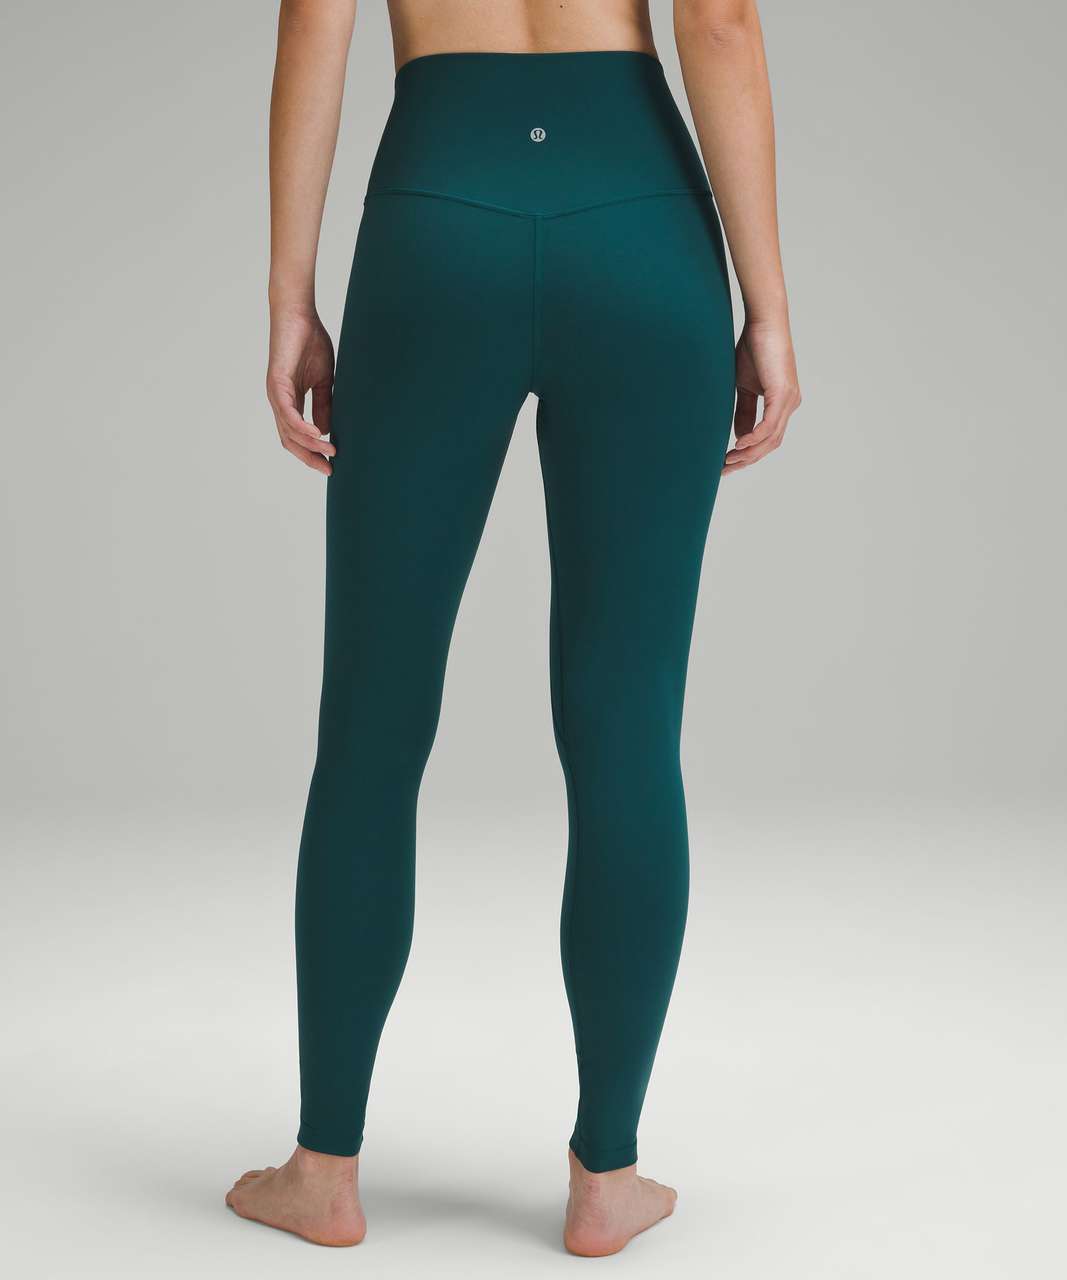 ALIGN 28” HIGH RISE PANT- STORM TEAL